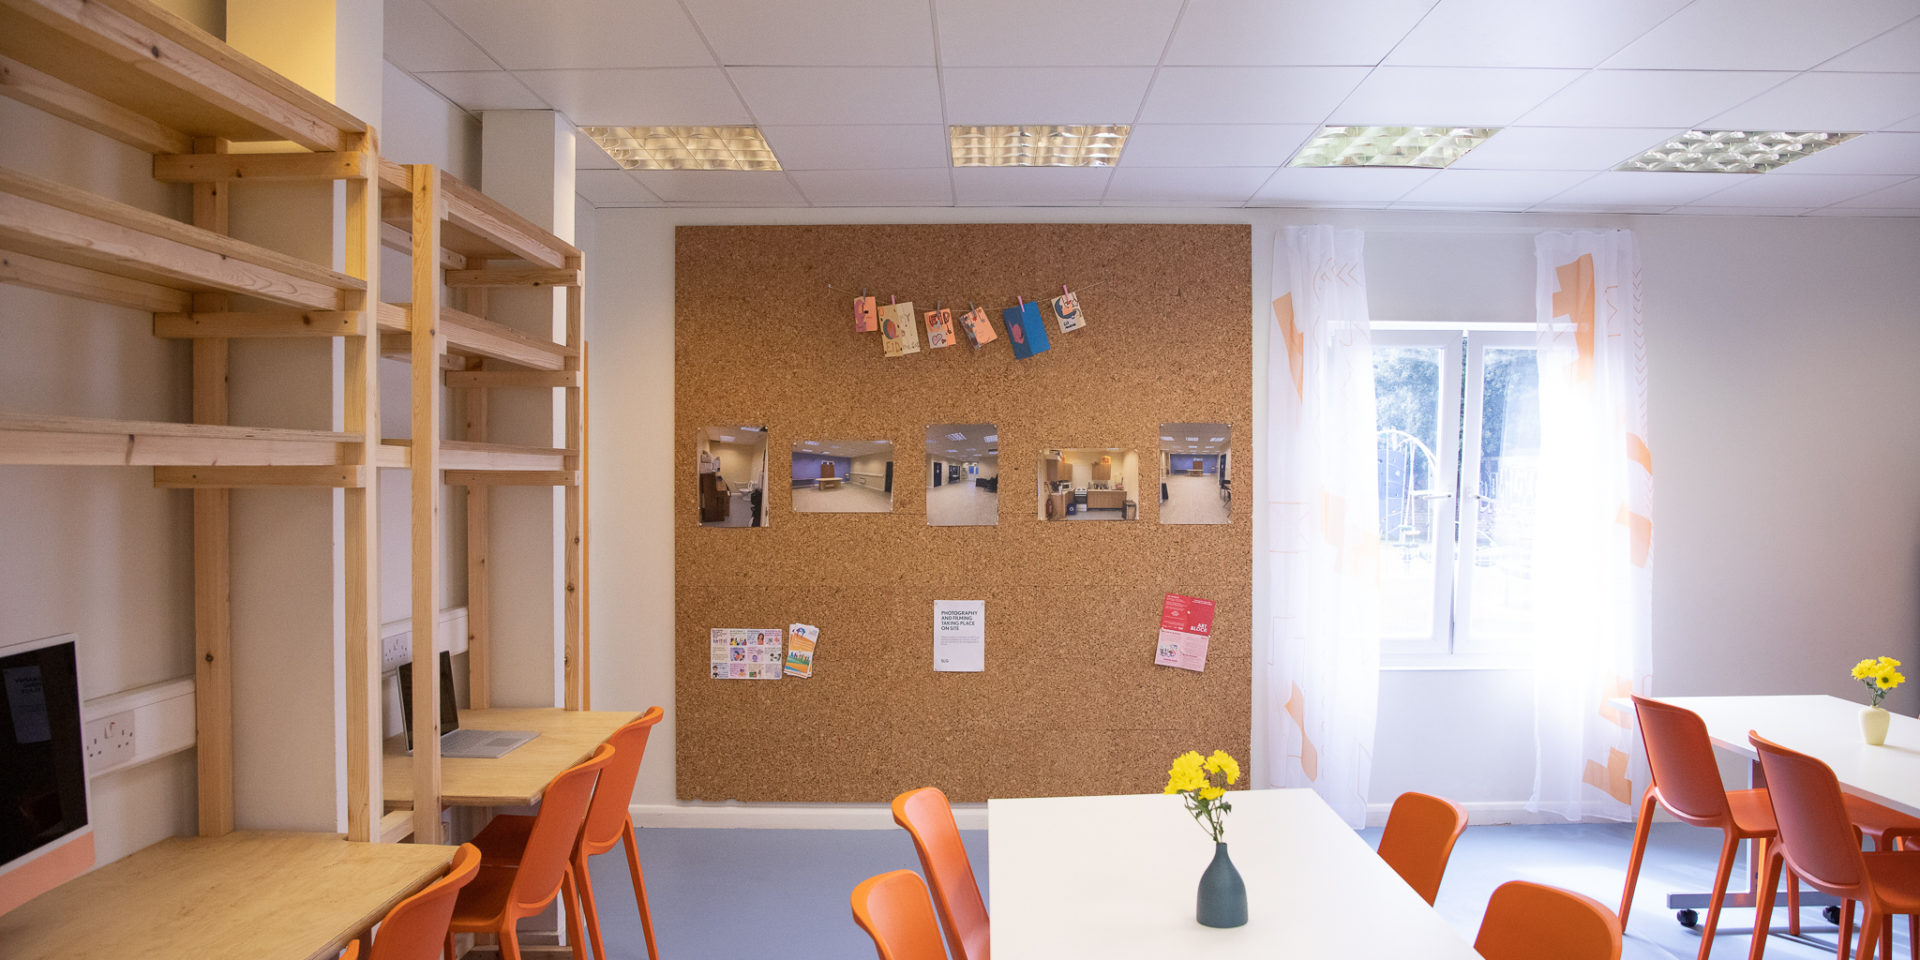 A bright community centre room. There are lots of orange chairs and a big notice board with photos on it. There is a vase with daffodils on the table.